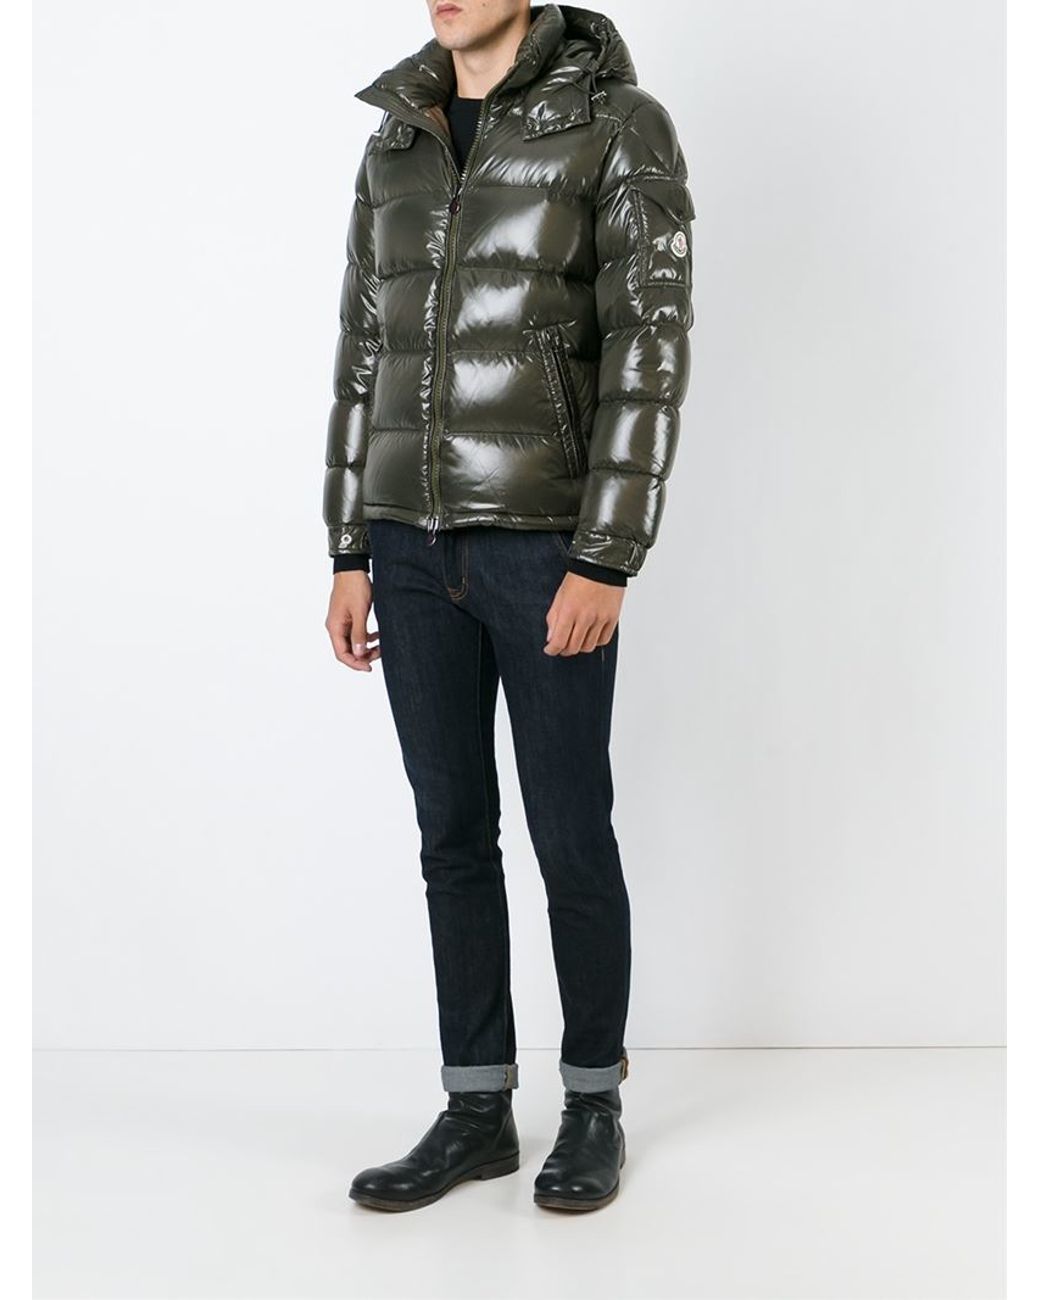 Moncler 'maya' Padded Jacket in Green for Men | Lyst